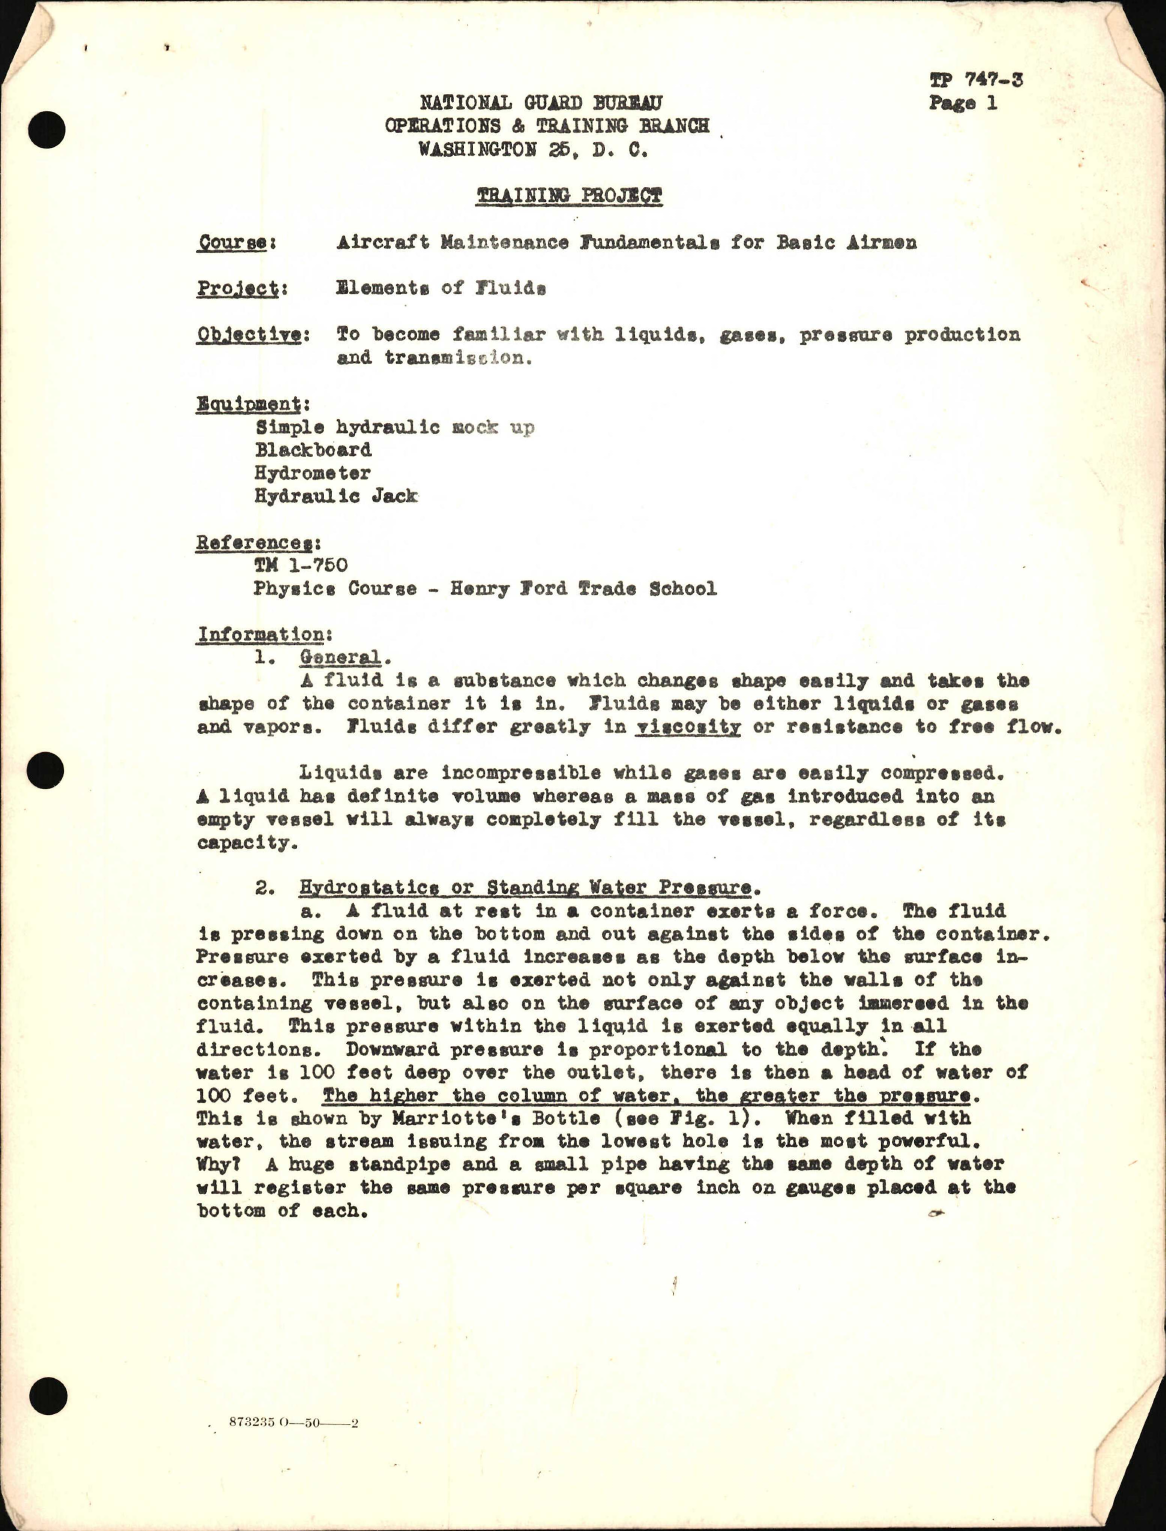 Sample page 1 from AirCorps Library document: Training Project, Elements of Fluids